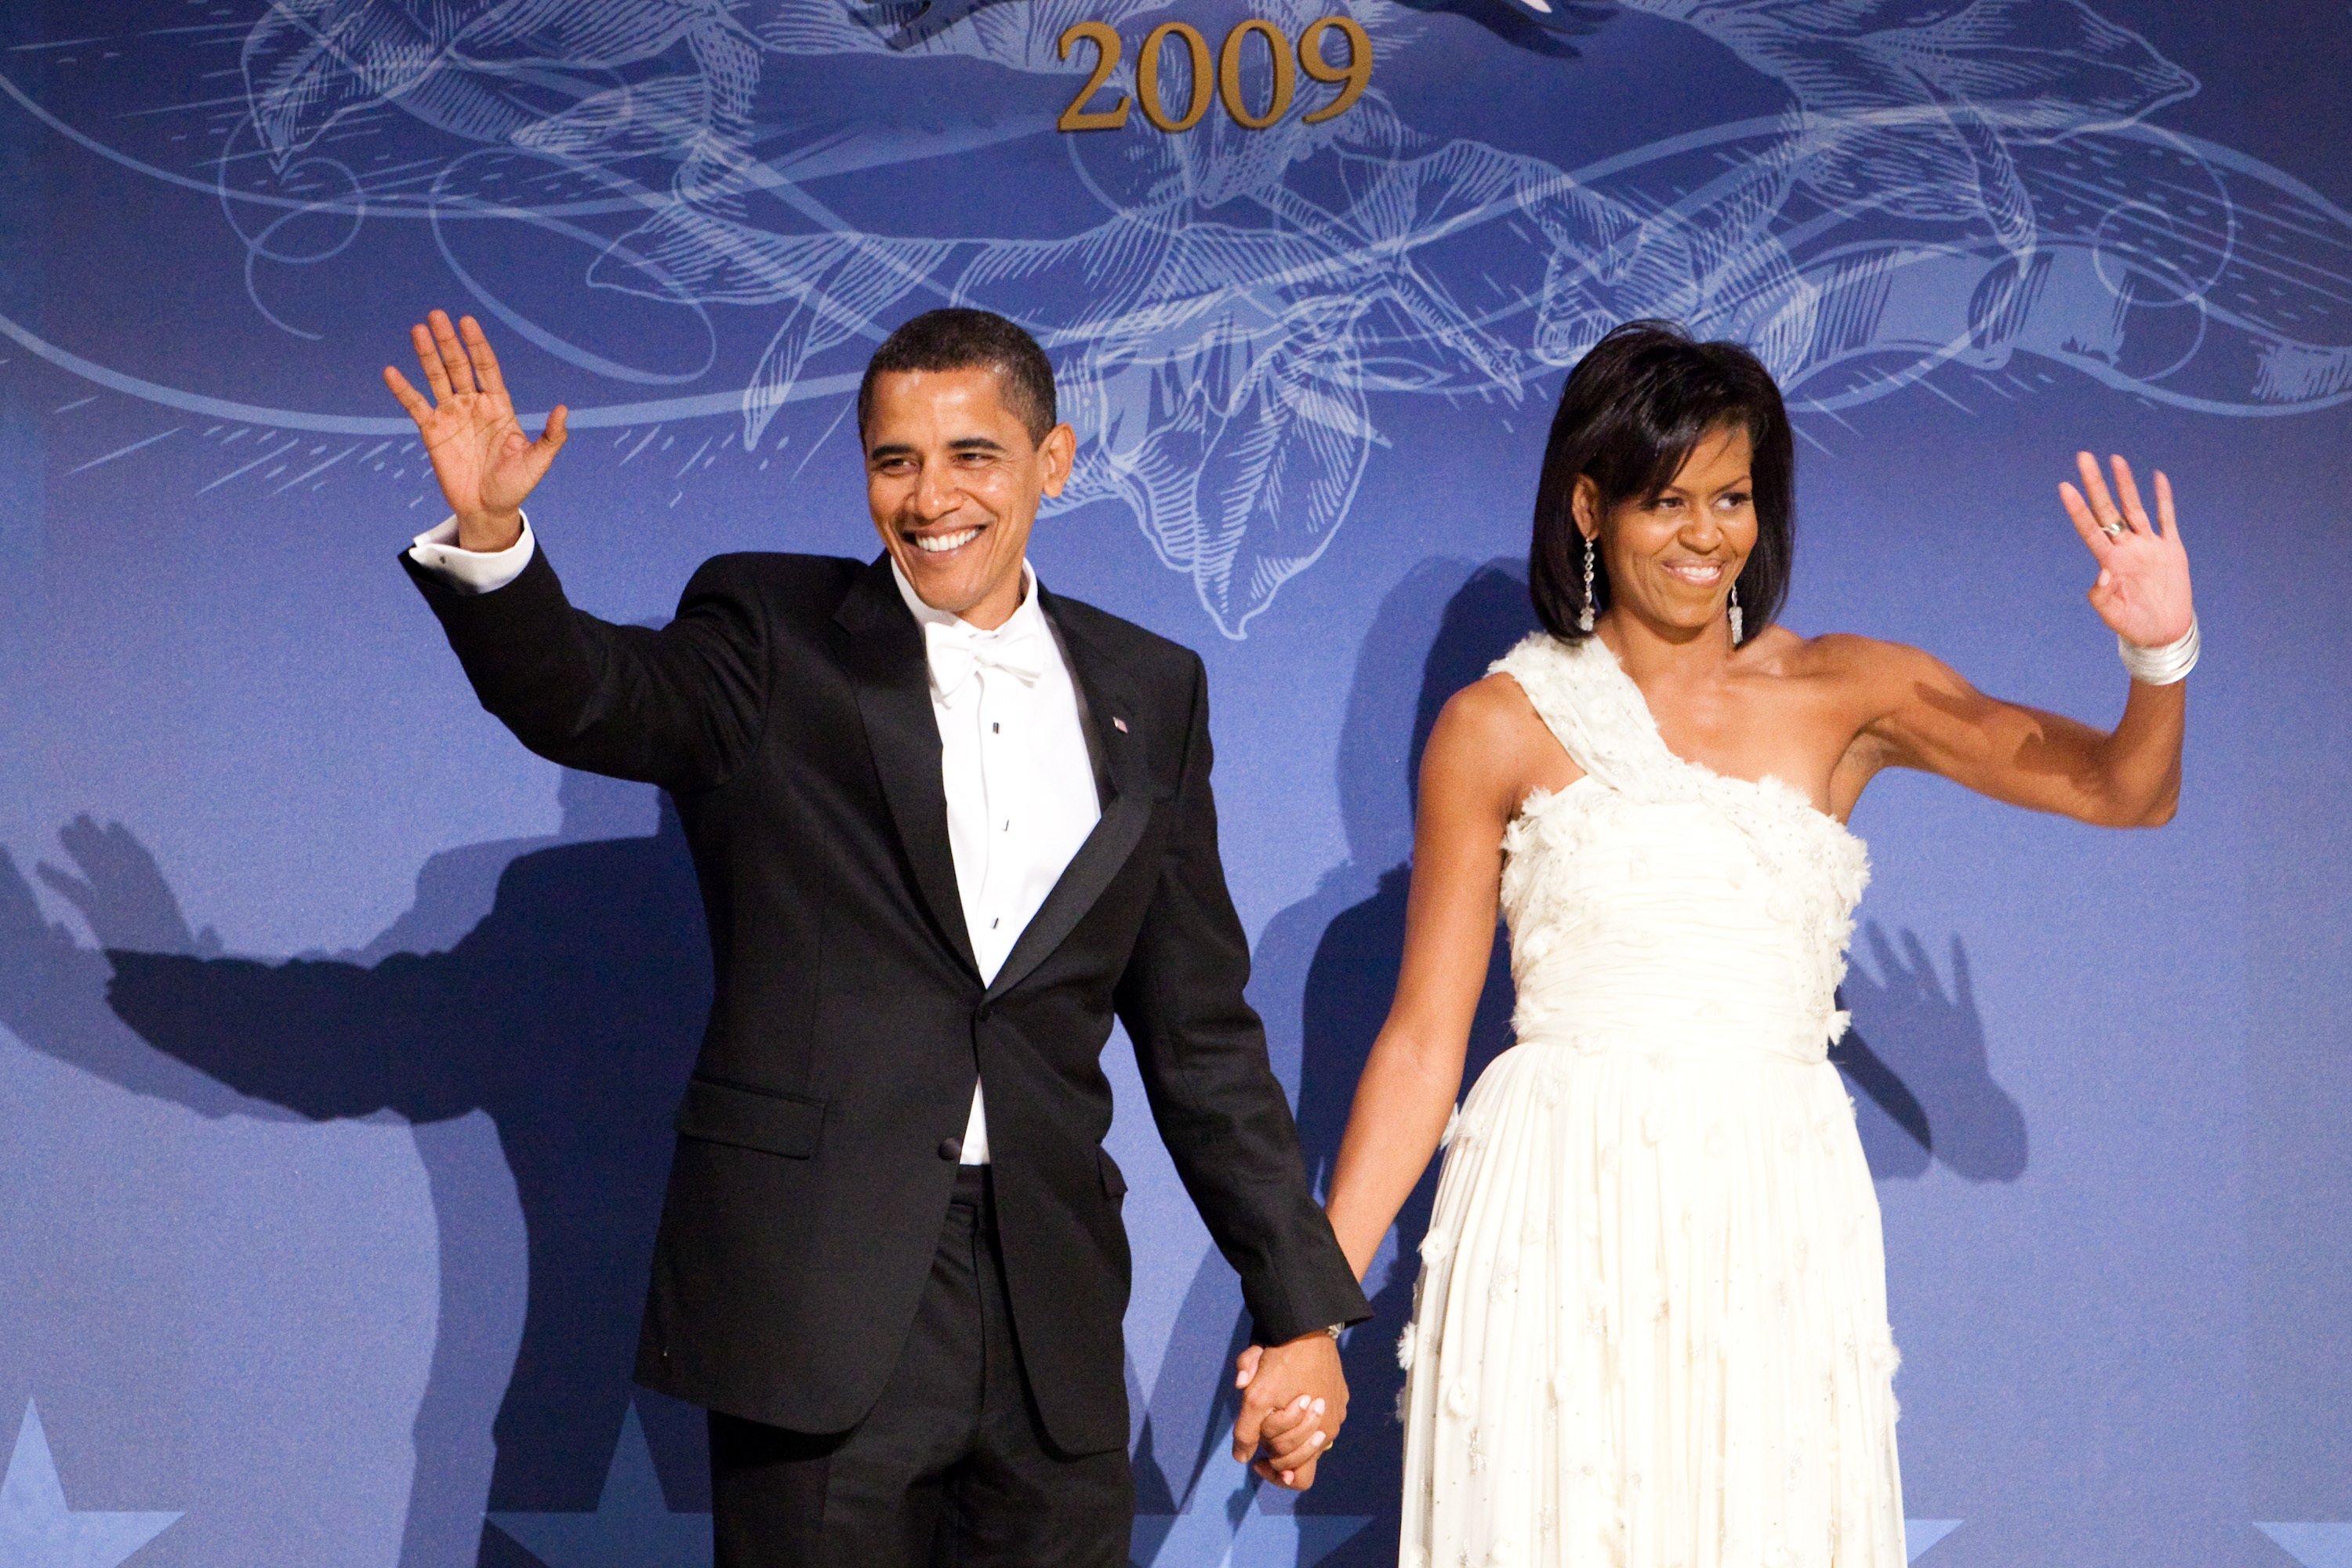 Barack Obama and Michelle Obama arrive hand in hand at the Southern Inaugural Ball on January 21, 2009, Washington, DC | Source: Brendan Hoffman/Getty Images